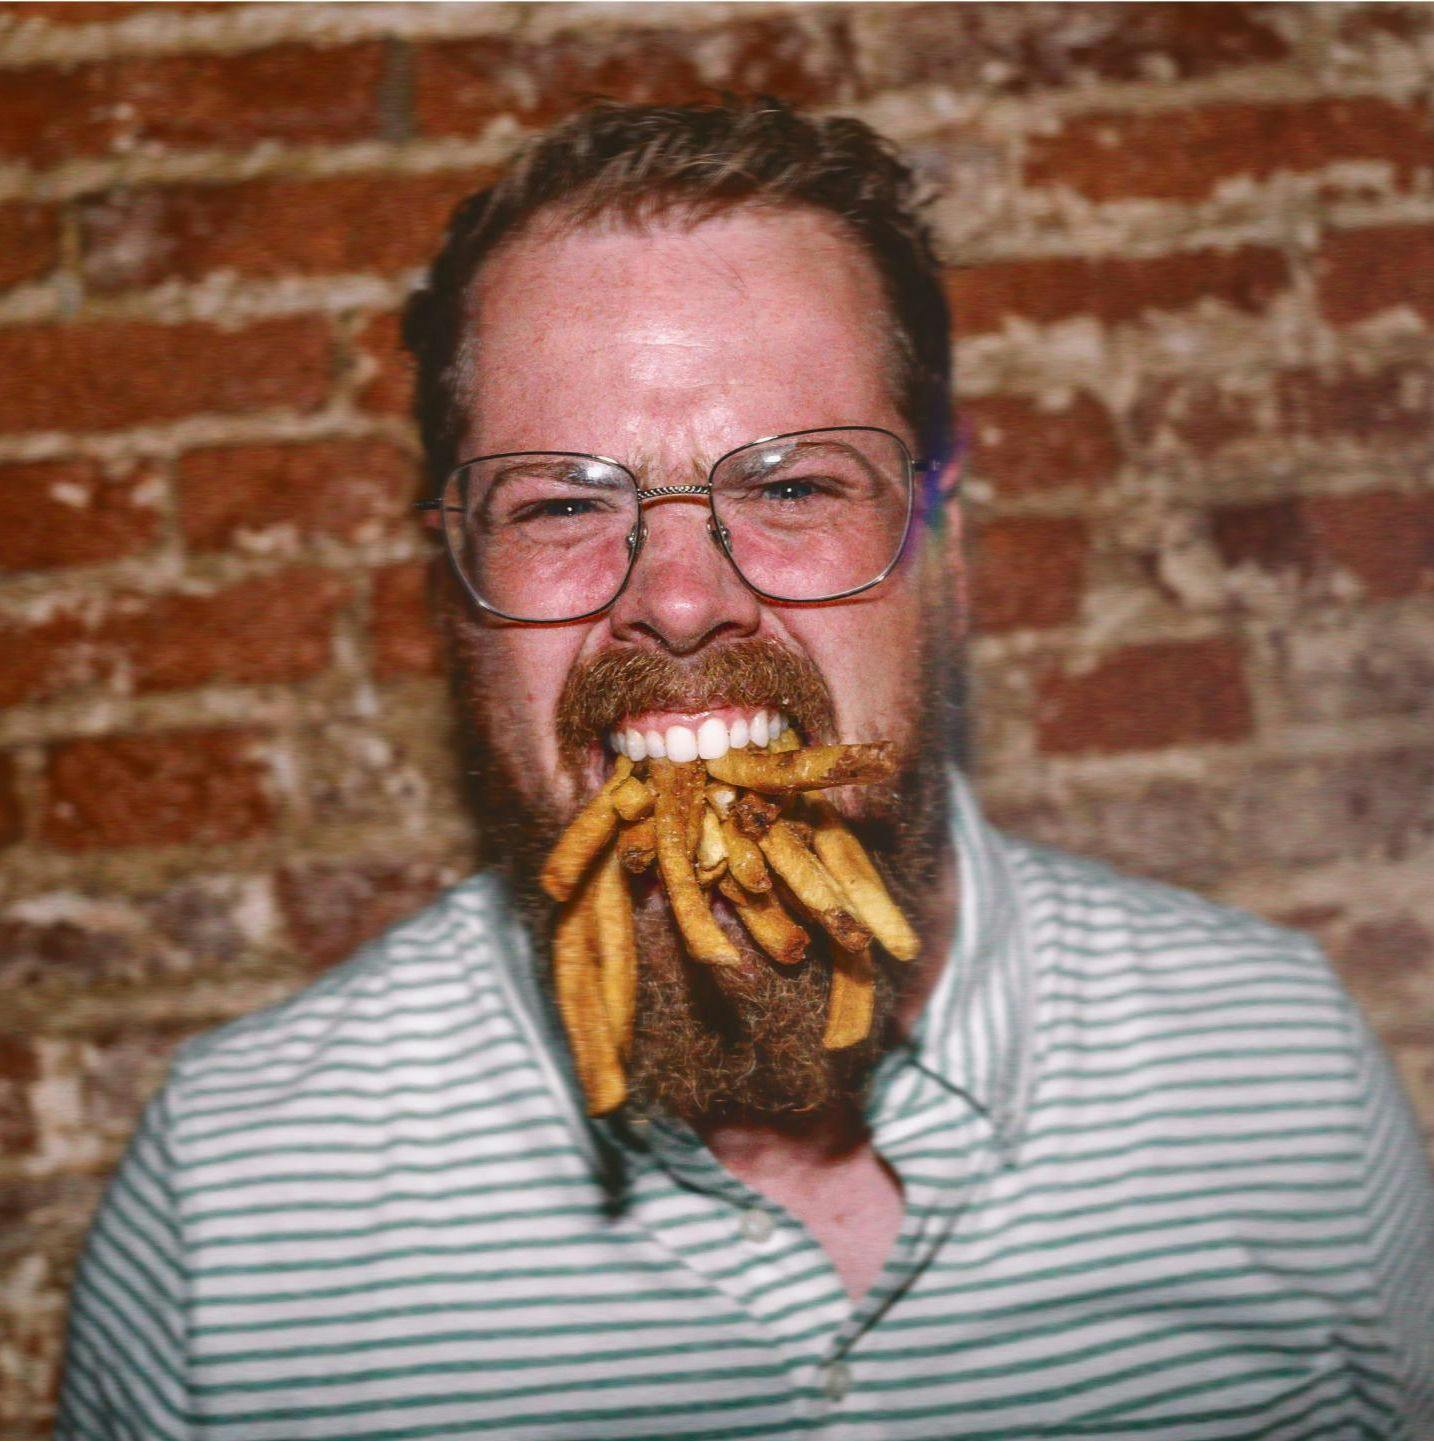 Man with fries in mouth